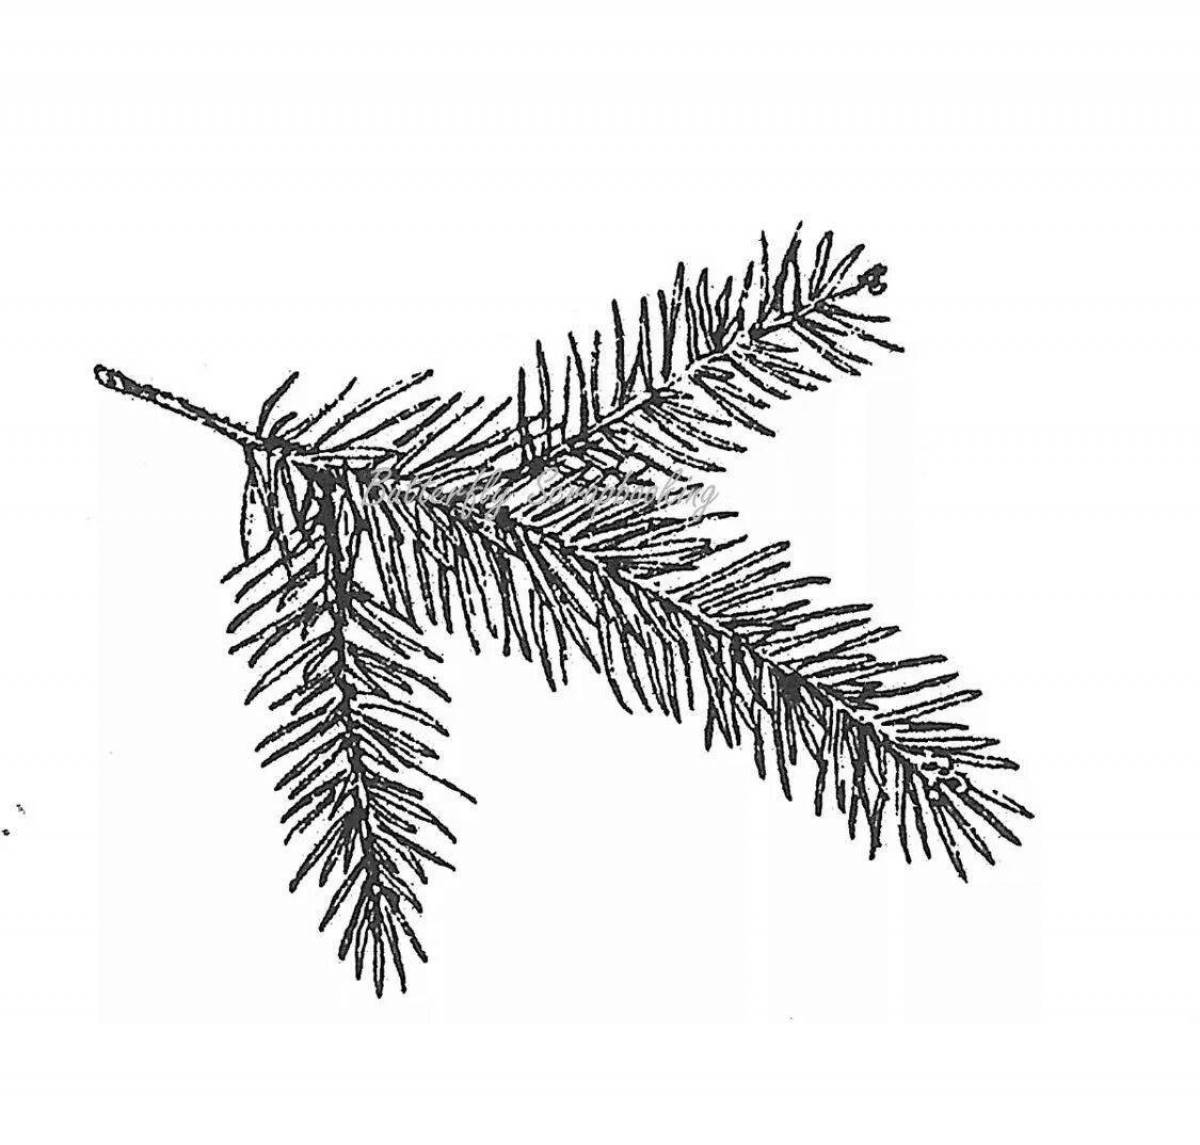 Colouring delightful spruce twig